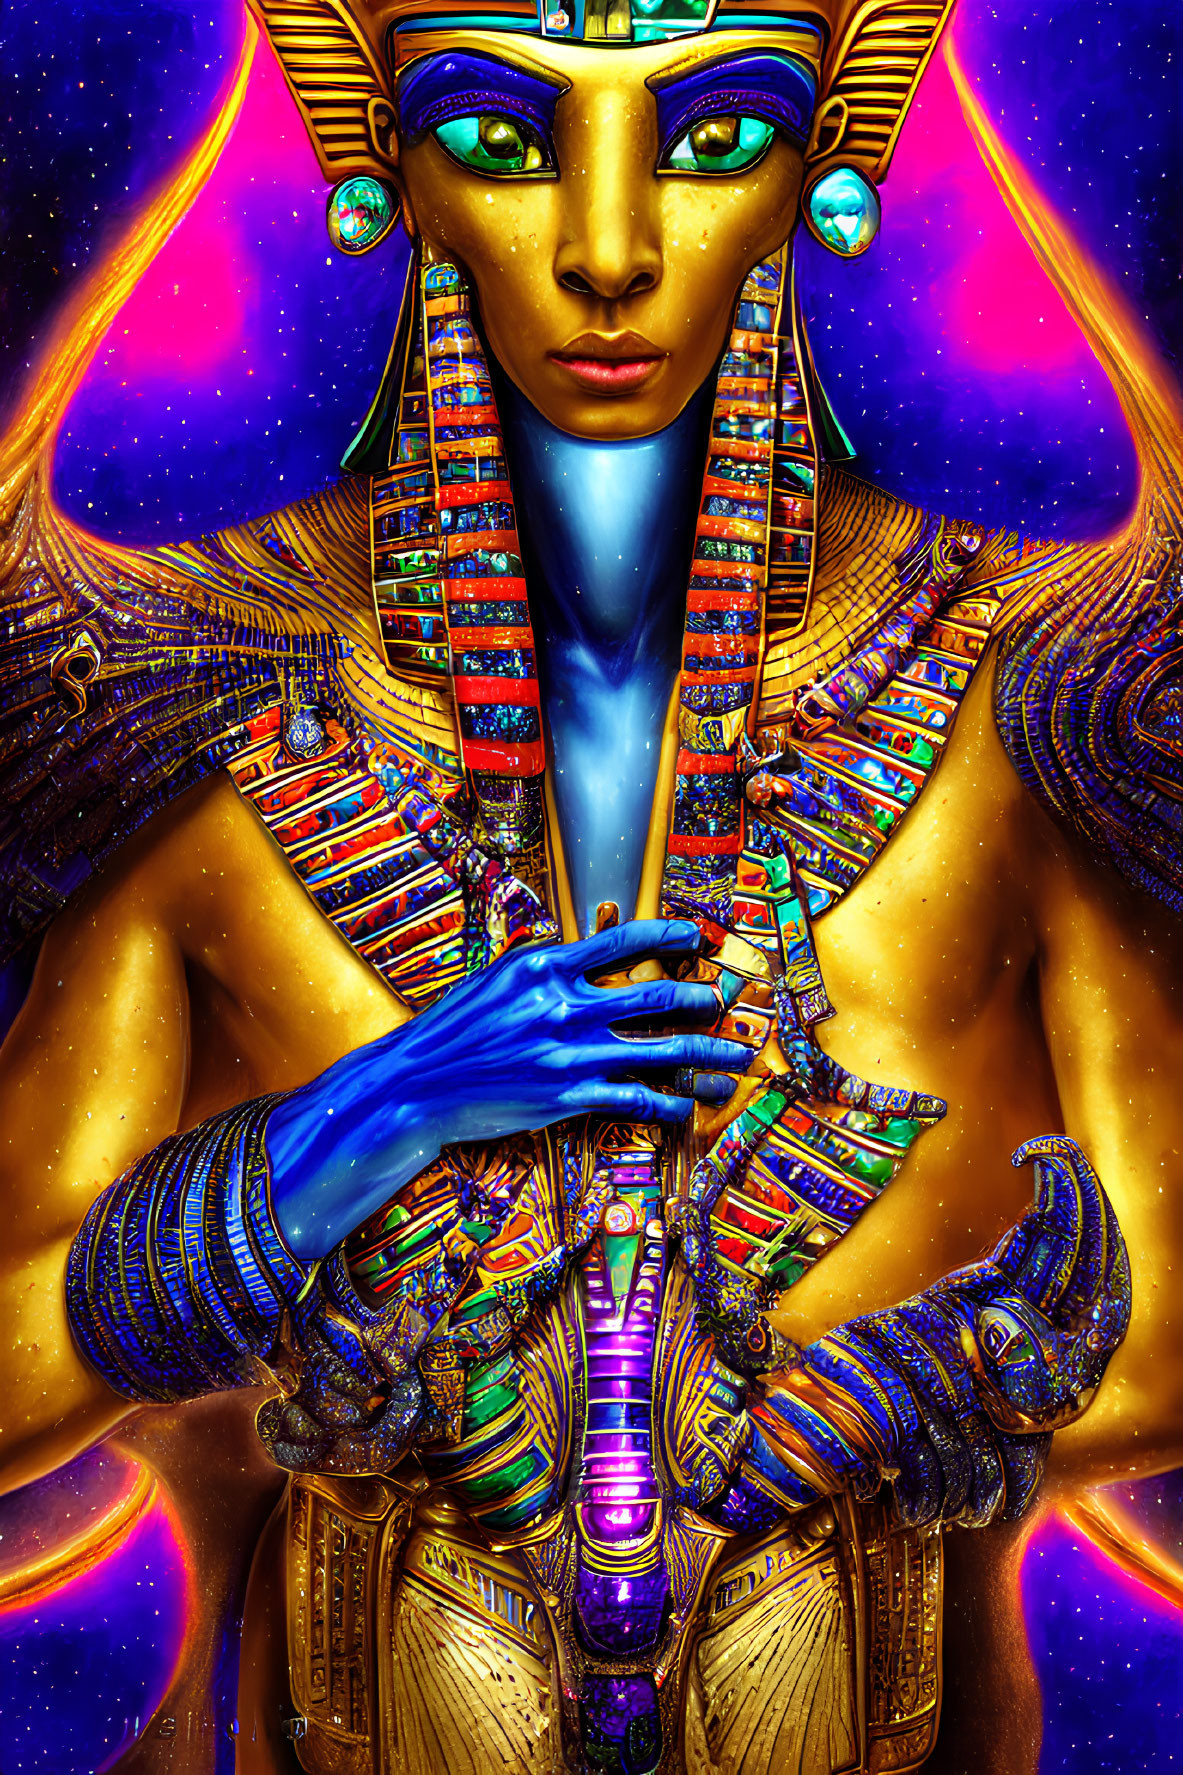 Colorful Egyptian Pharaoh Artwork with Cosmic Background